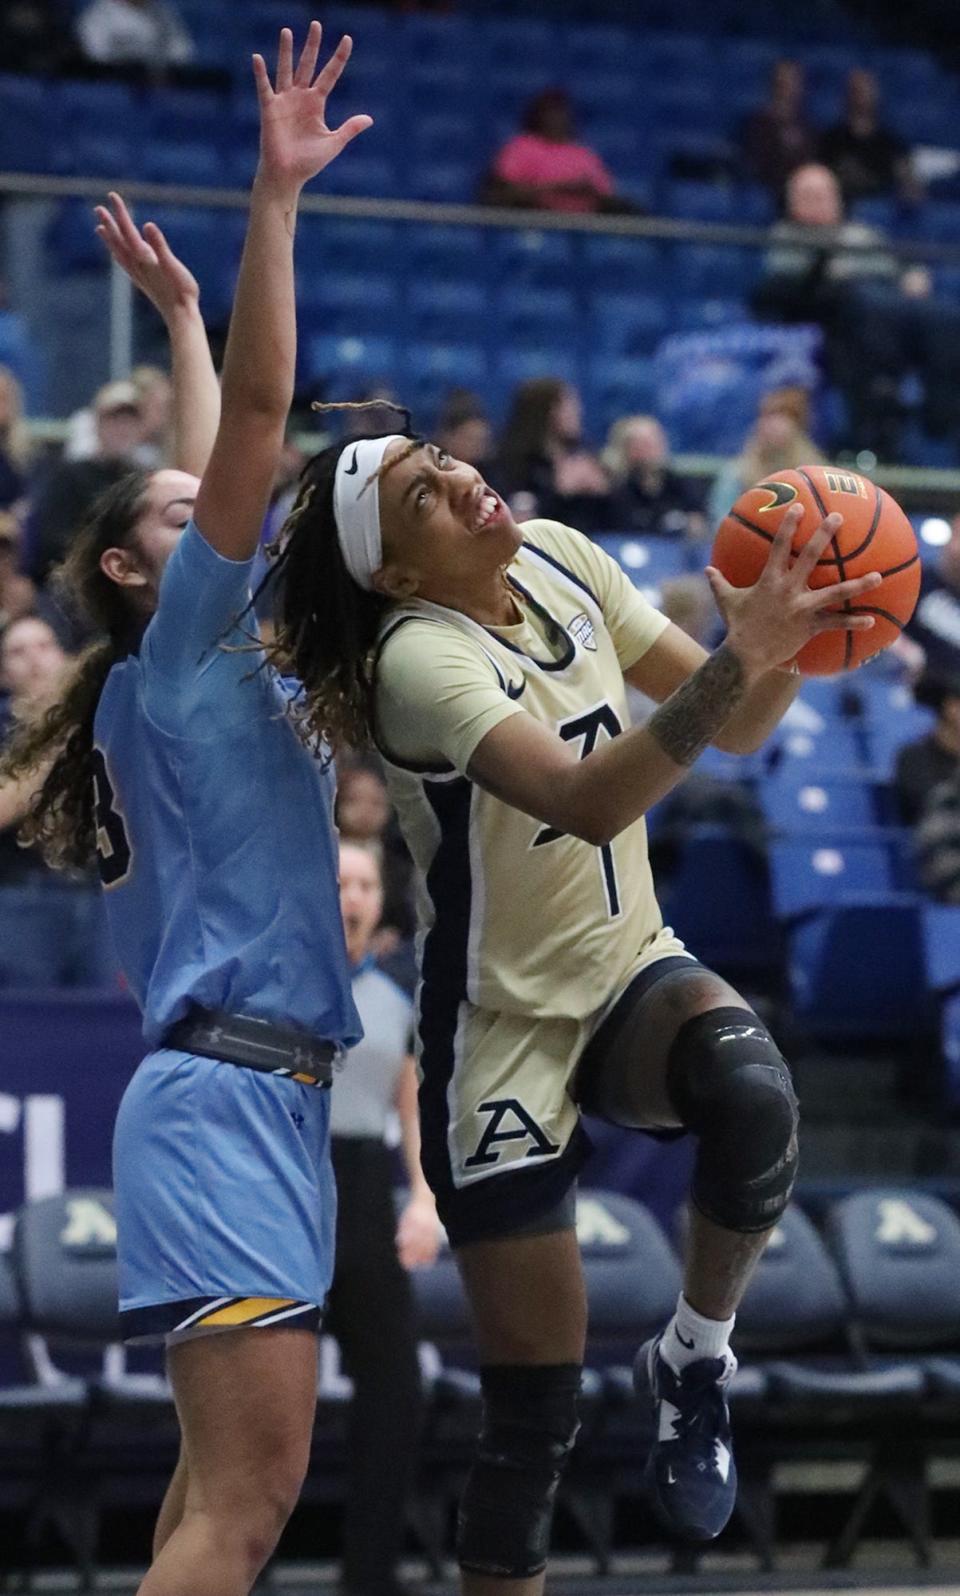 Kent Stat's Corynne Hauser defends as Akron's Dominique Camp looks to shoot Wednesday, Feb. 1, 2023, at Rhodes Arena.